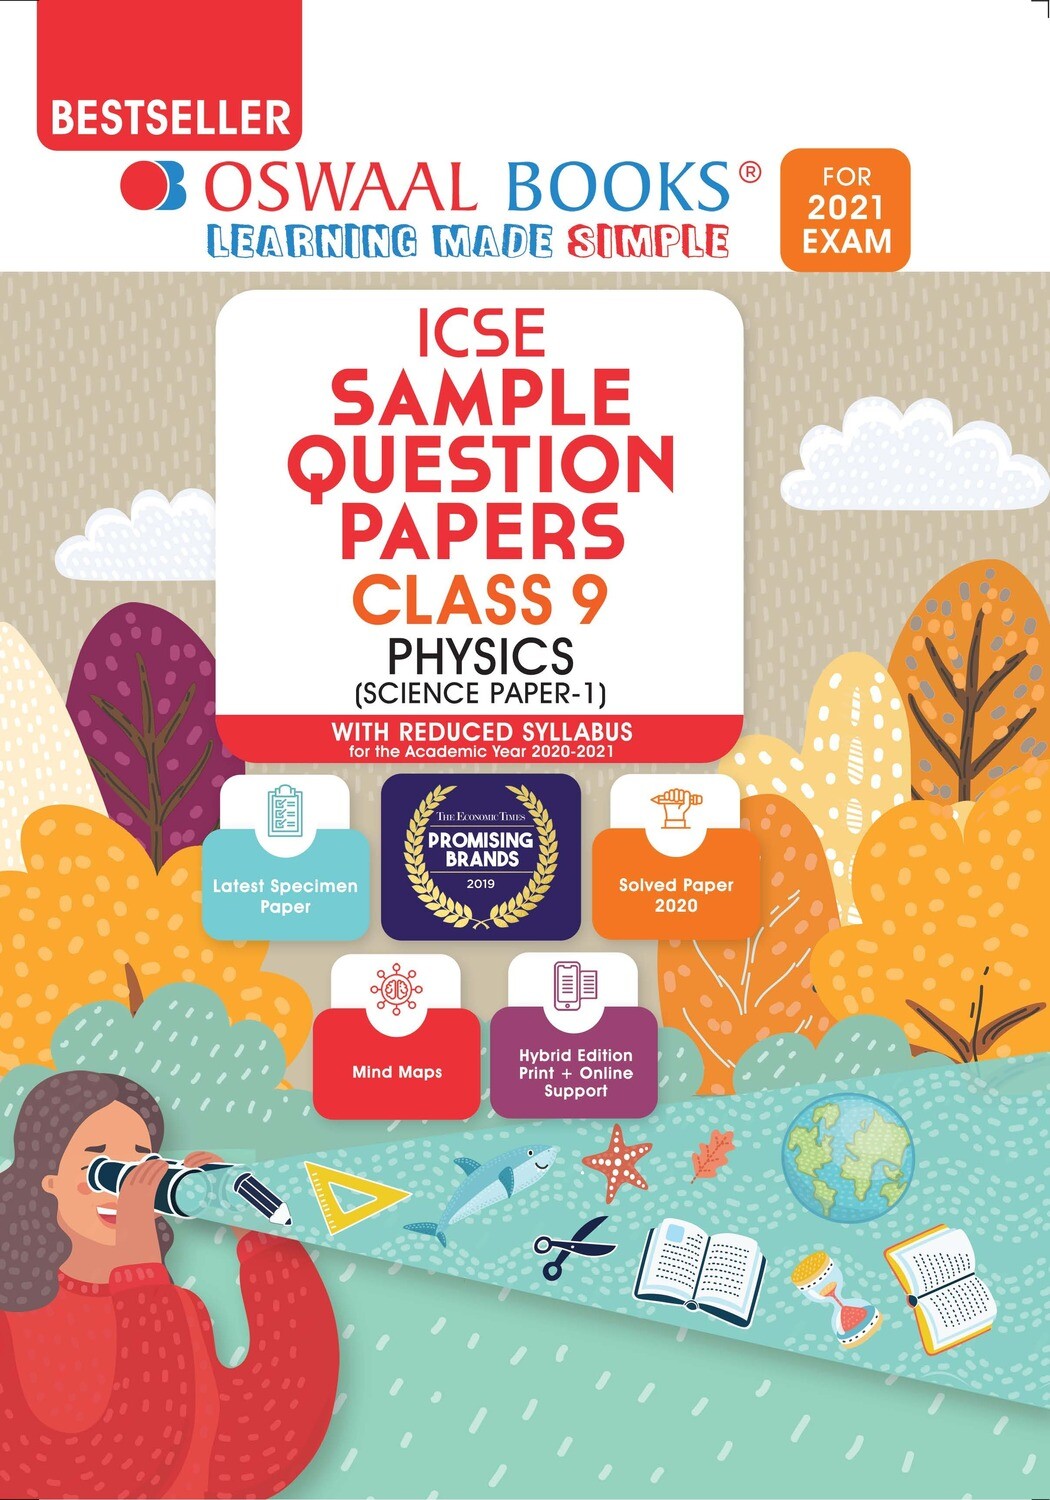 Buy e-book: Oswaal ICSE Sample Question Papers Class 9 Physics (Reduced Syllabus for 2021 Exam): 9789354232251